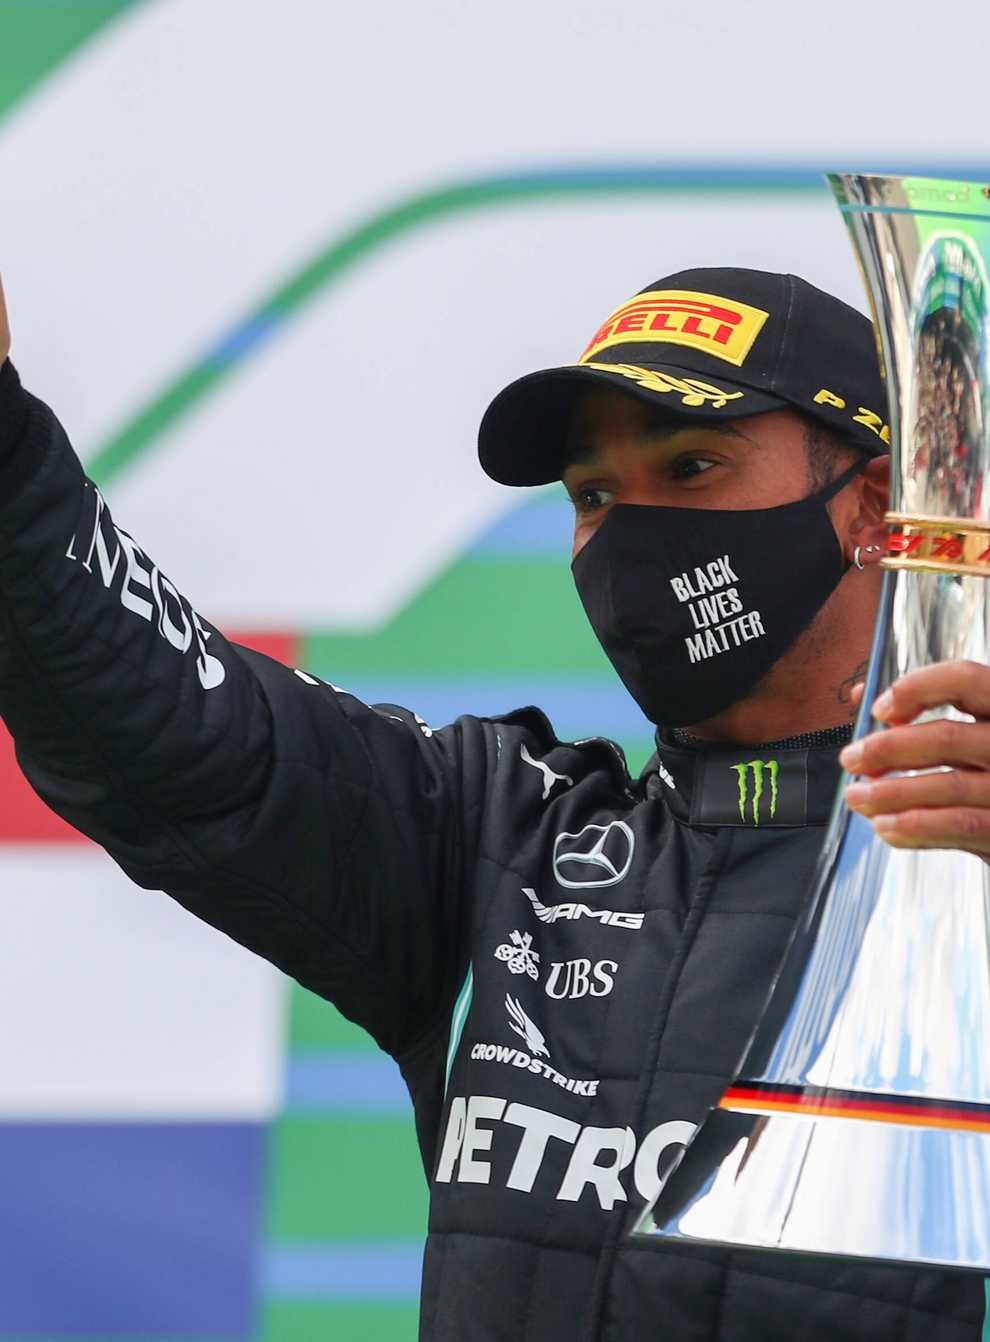 Hamilton equalled Michael Schumacher’s record of 91 Grand Prix victories on Sunday